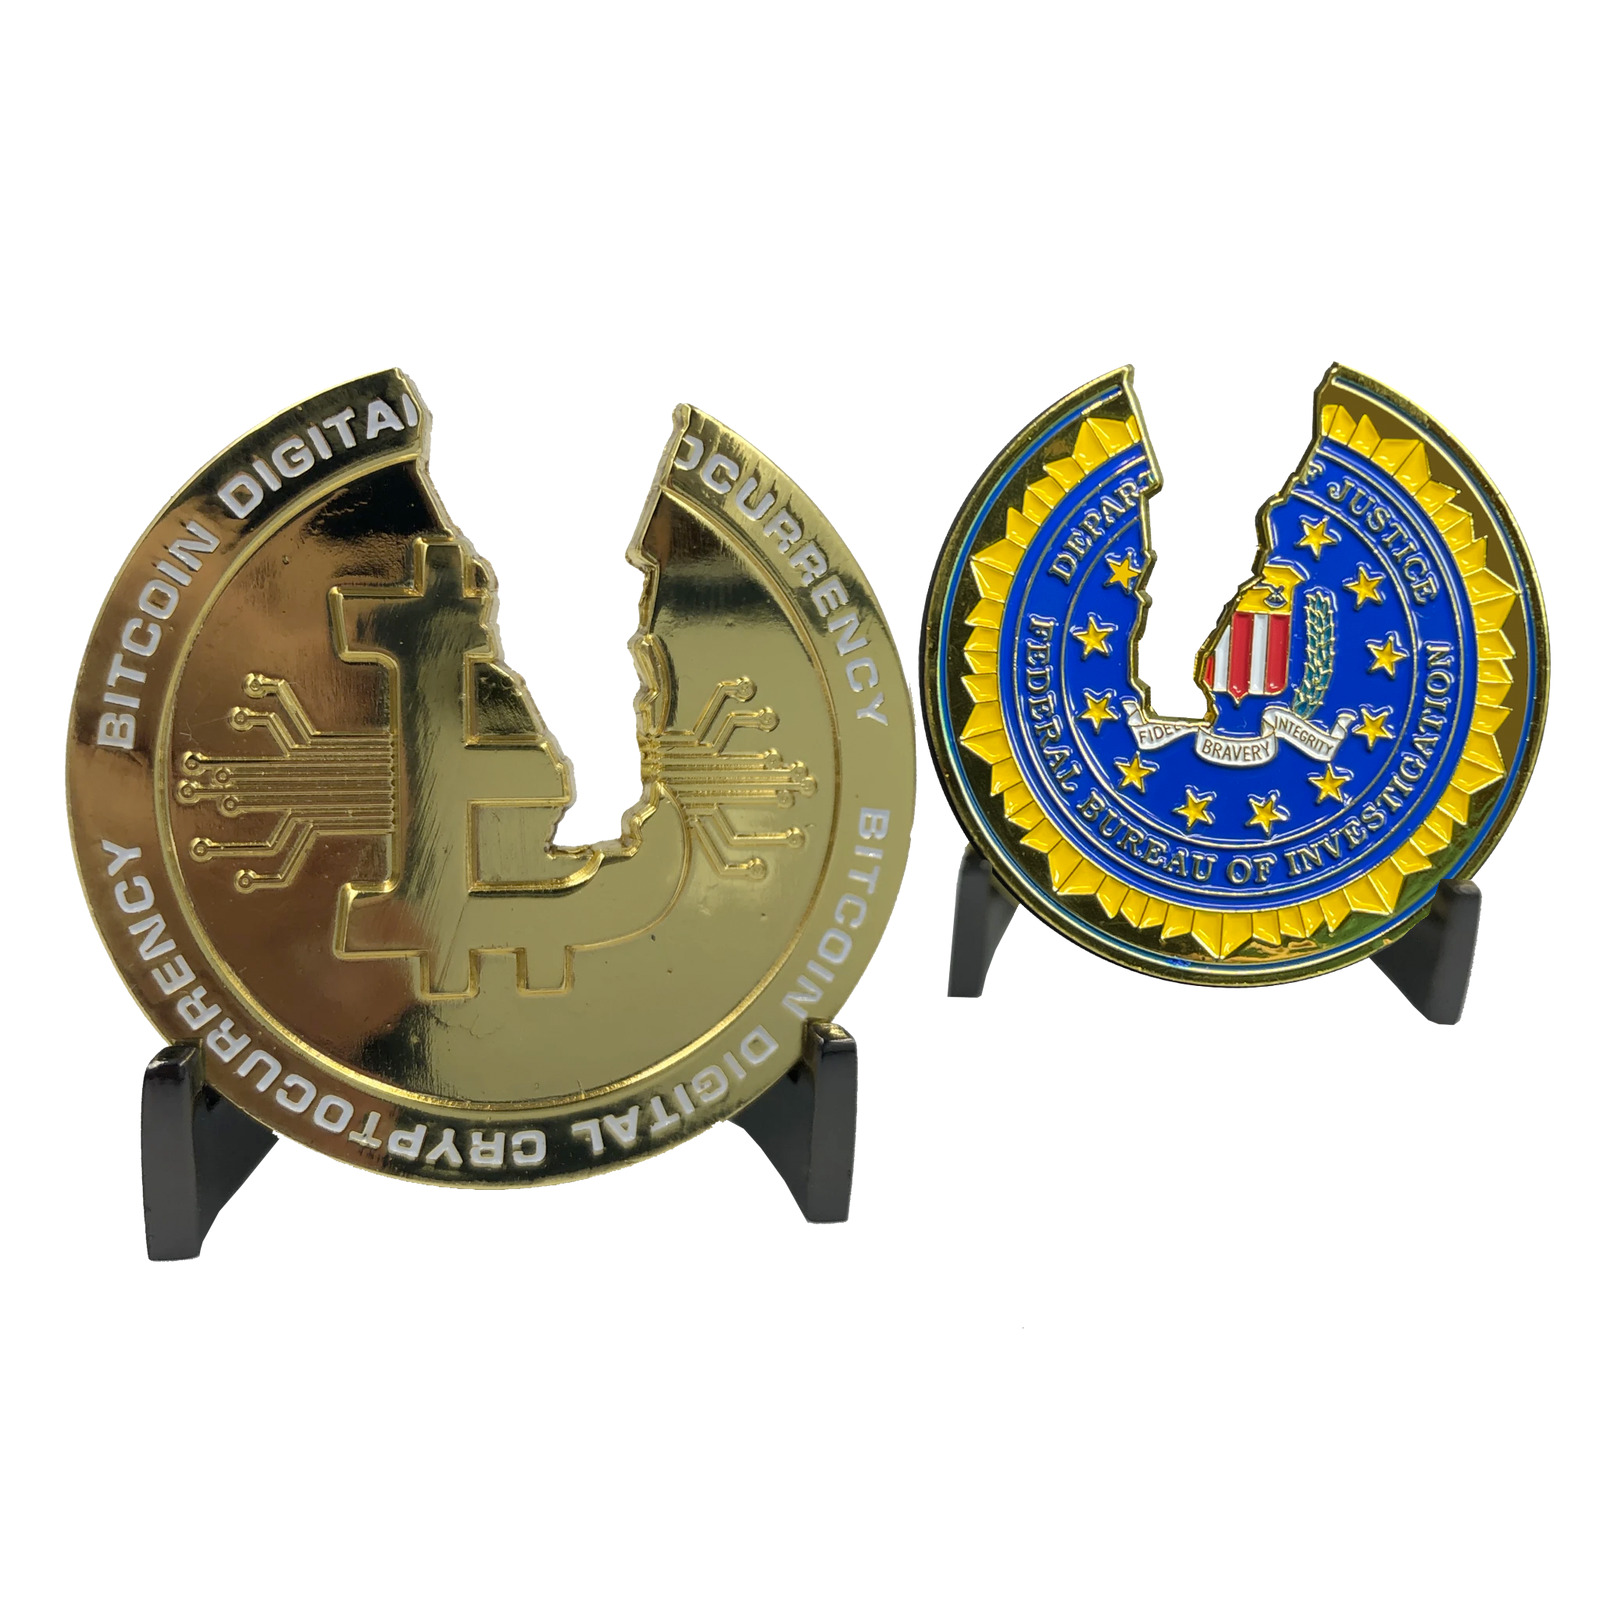 CL4-17 Busted Challenge Coin Financial Crime Task Force CryptoCurrency FBI JTTF